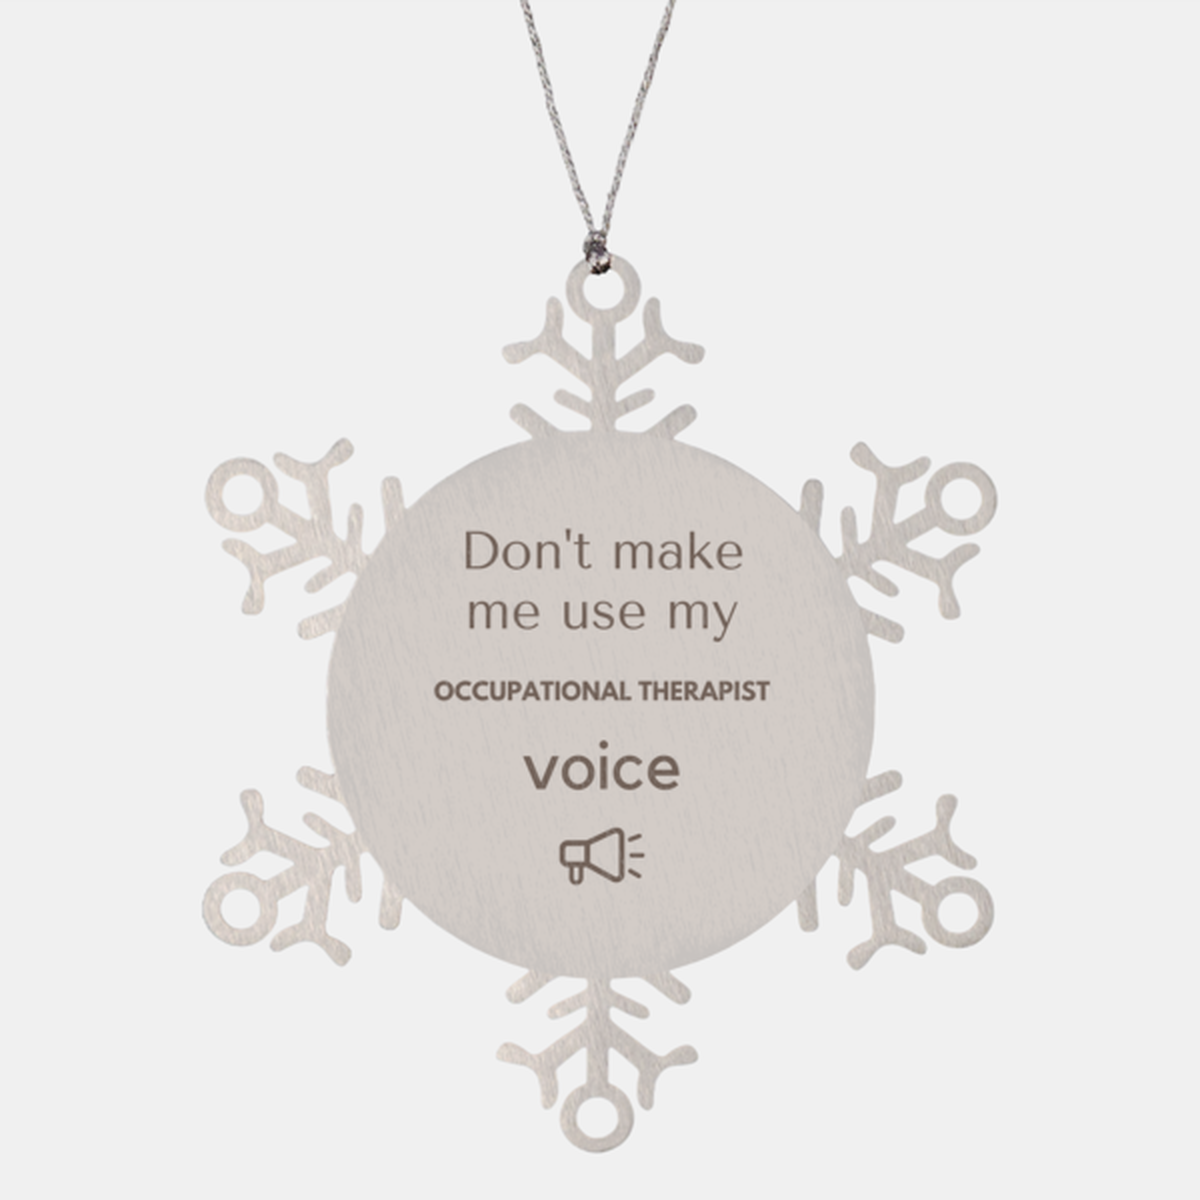 Don't make me use my Occupational Therapist voice, Sarcasm Occupational Therapist Ornament Gifts, Christmas Occupational Therapist Snowflake Ornament Unique Gifts For Occupational Therapist Coworkers, Men, Women, Colleague, Friends